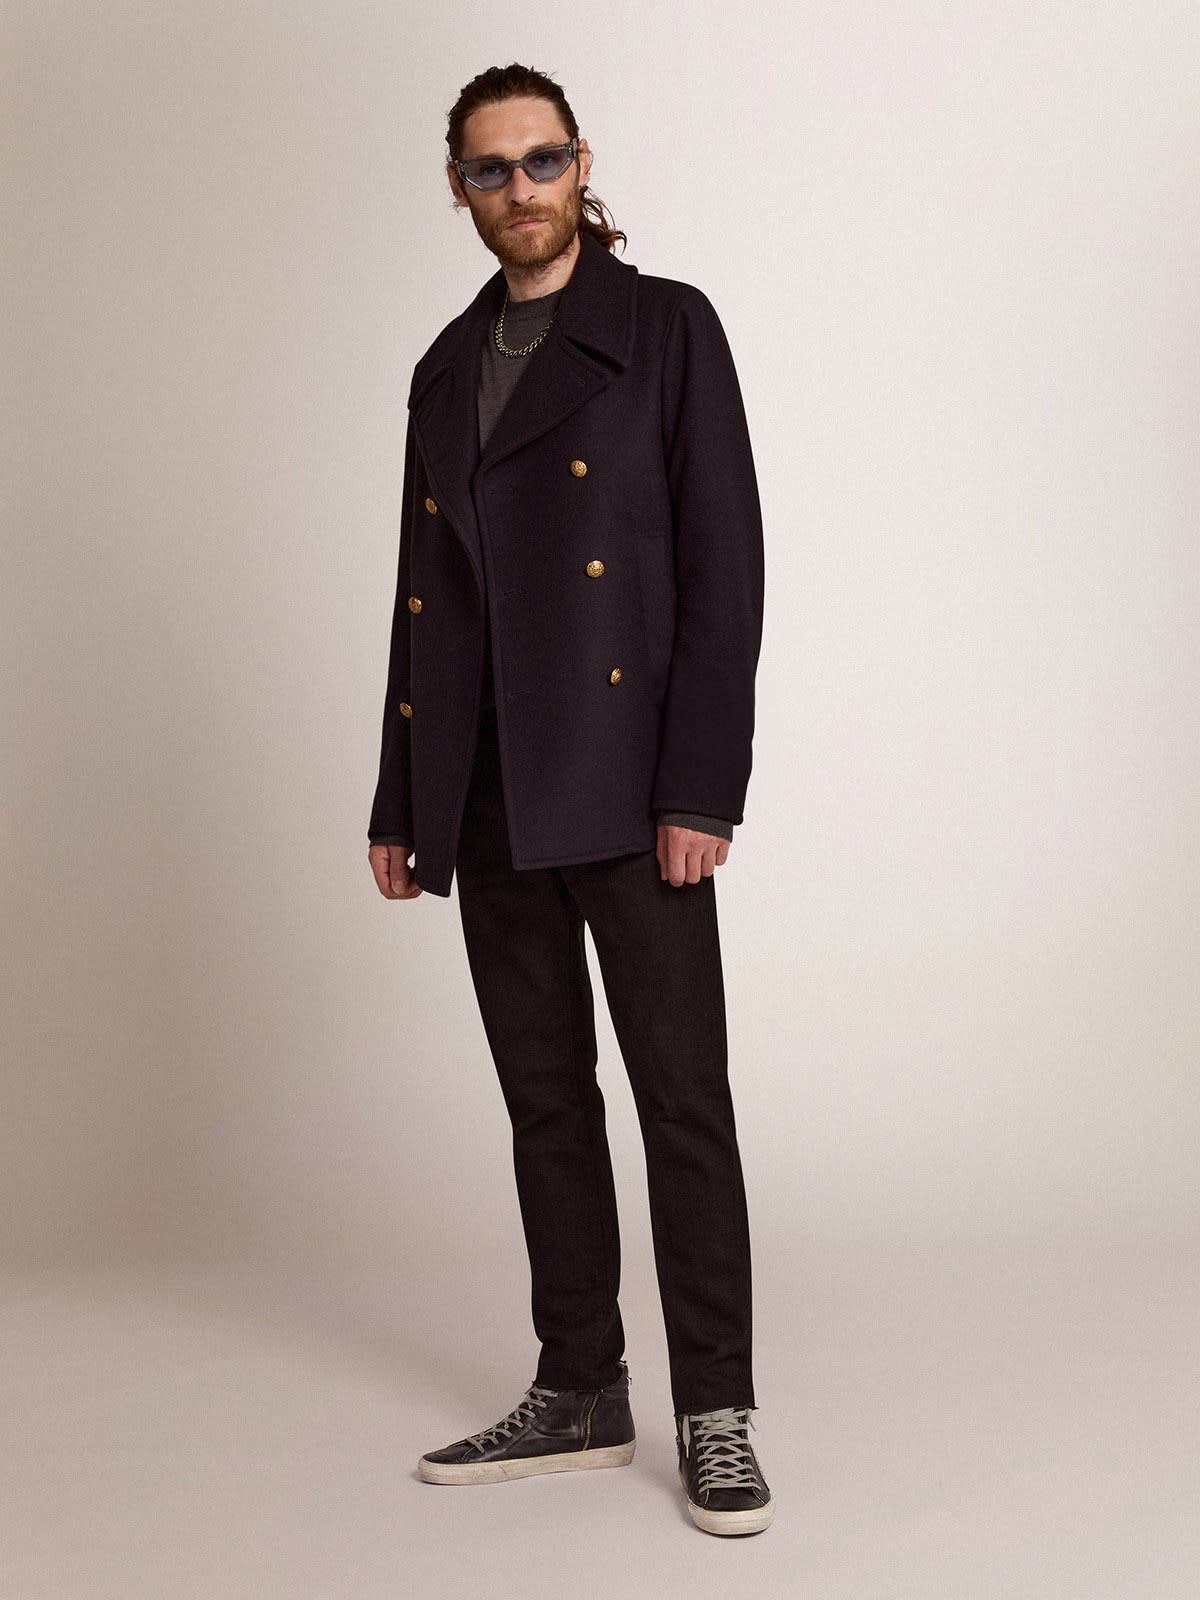 Men's double-breasted coat in dark blue wool with gold buttons